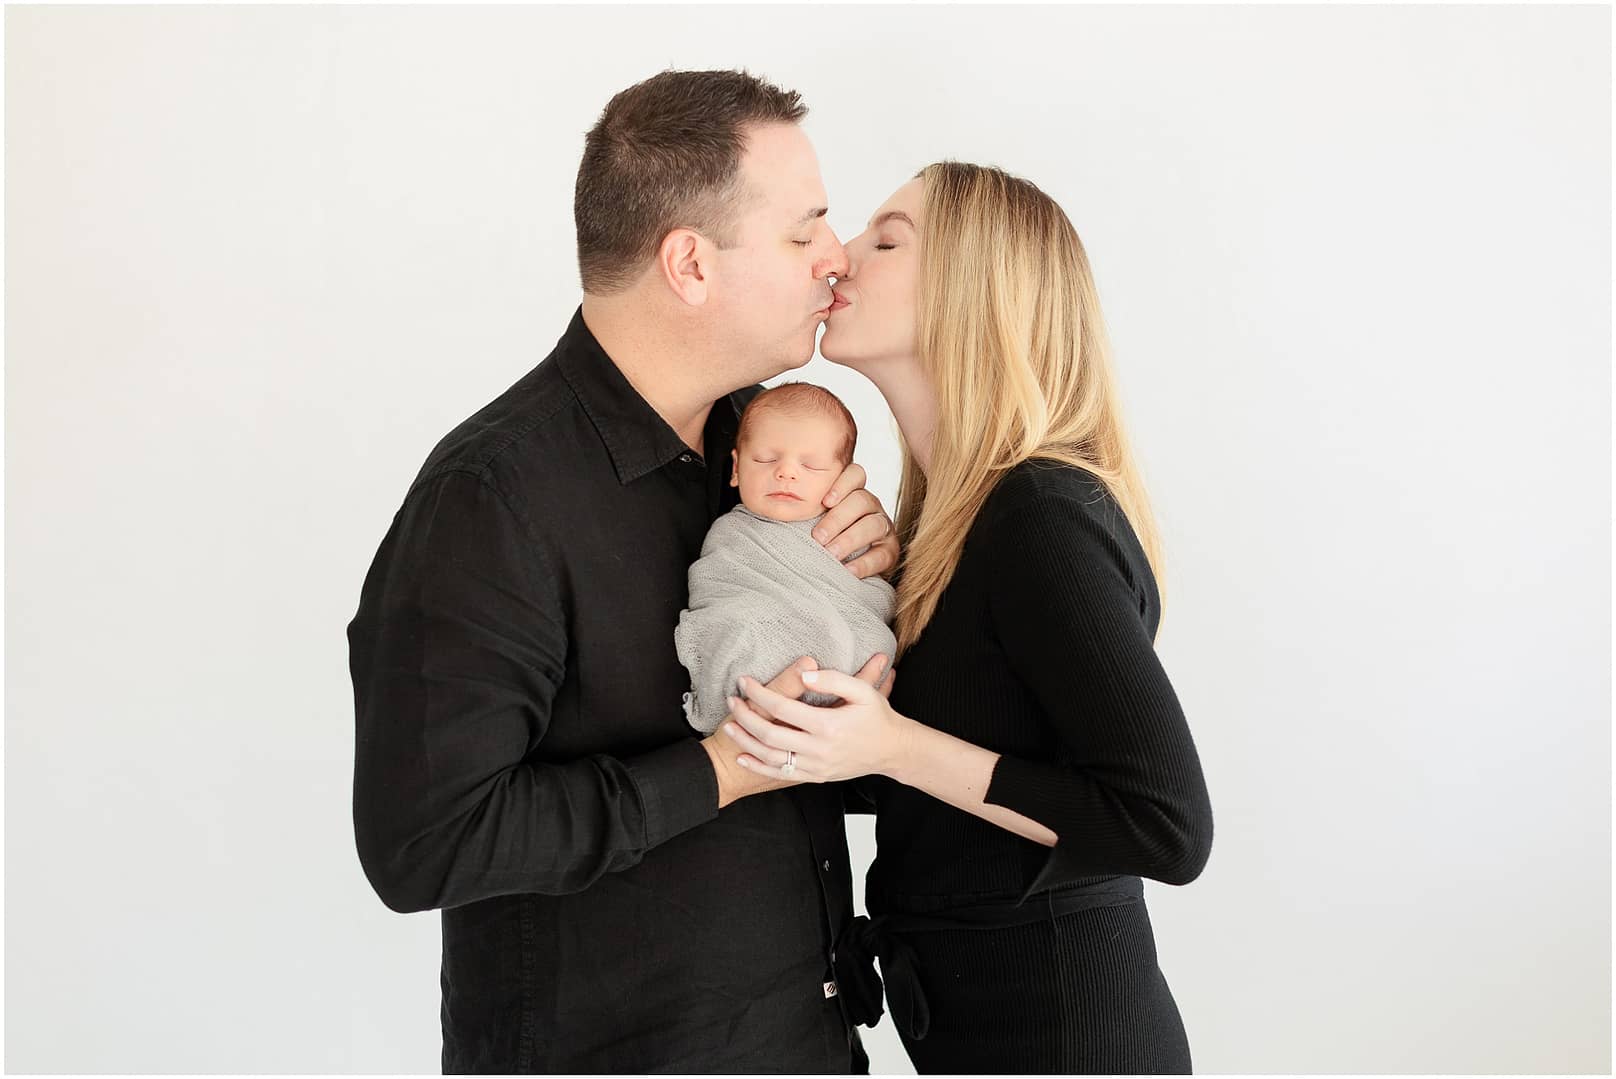 Mom and Dad go in for a kiss during newborn session. Photo by Tiffany Hix Photography.